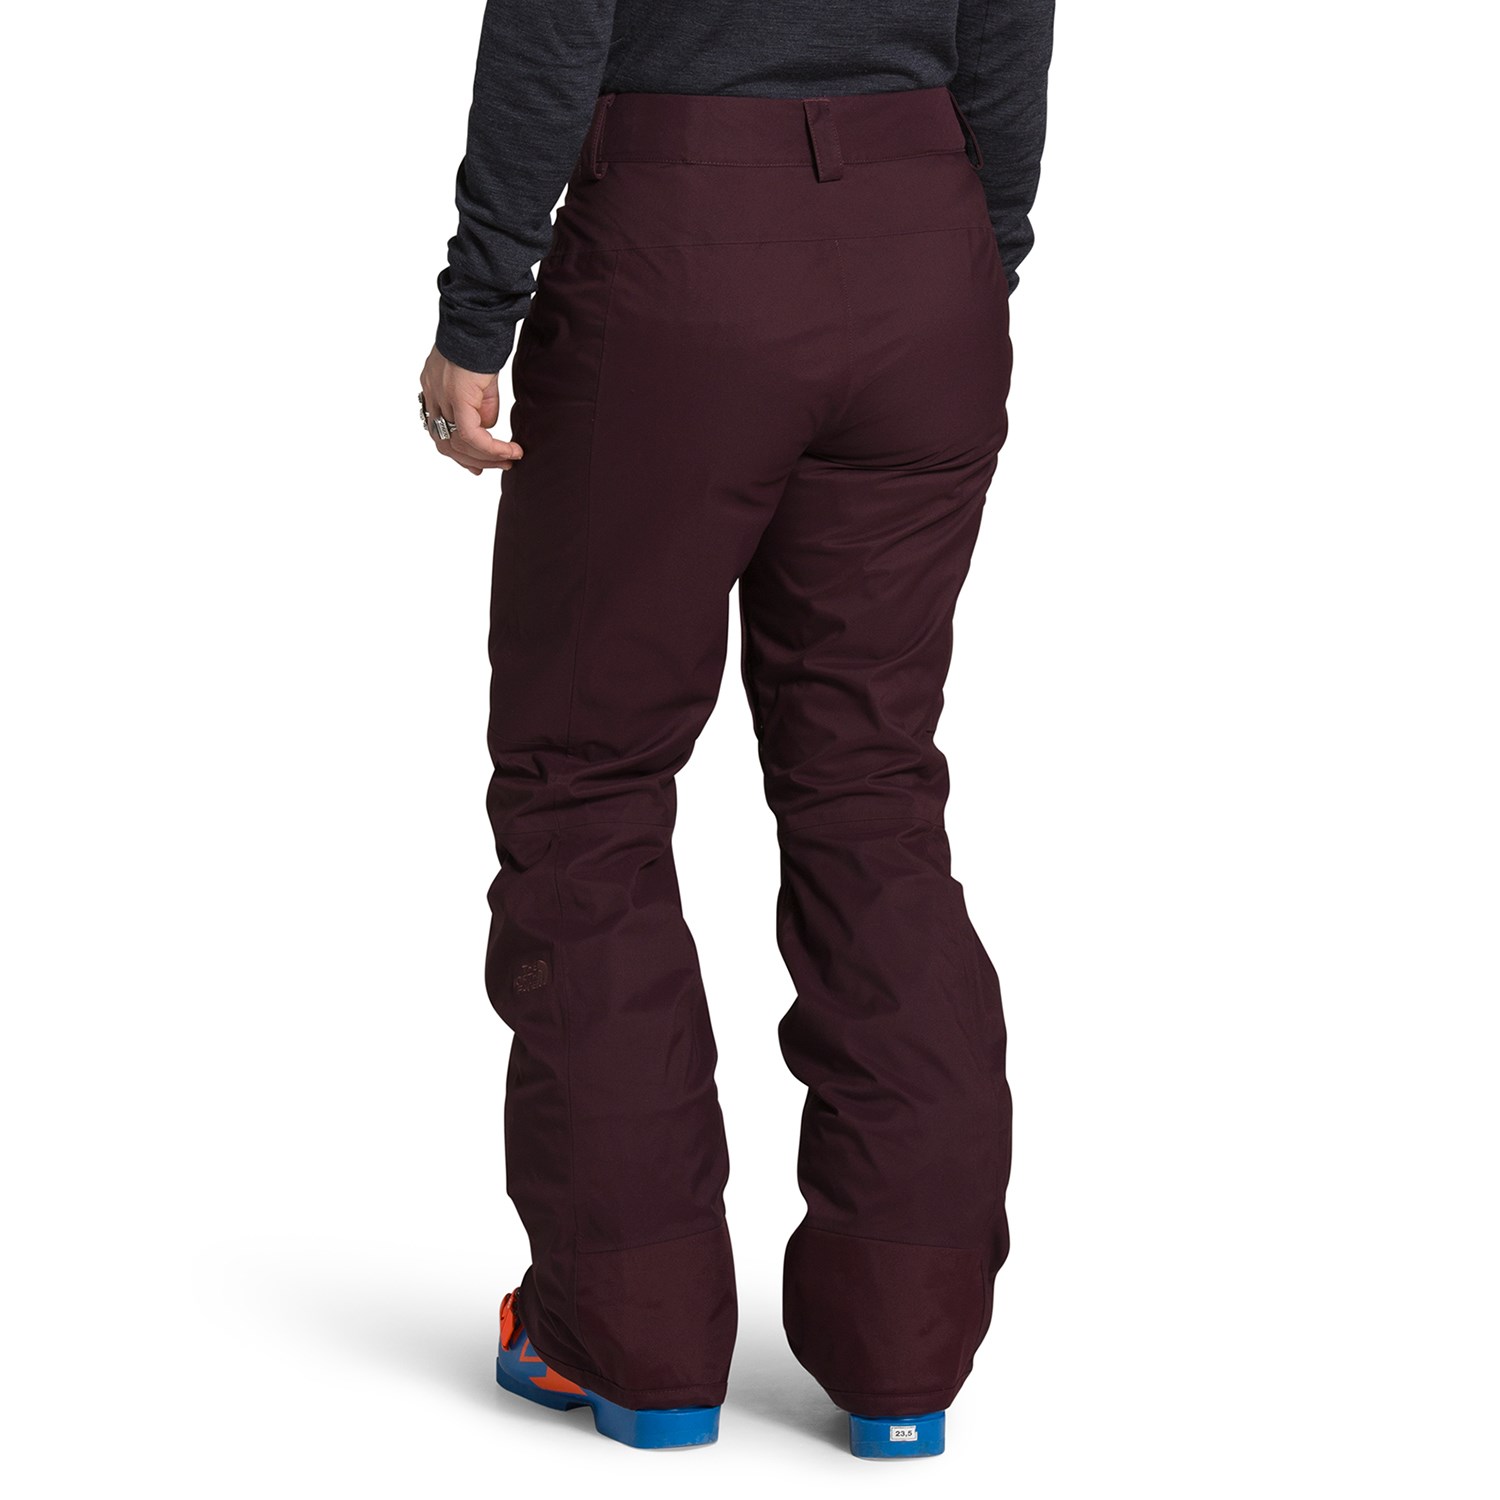 north face freedom pant women's